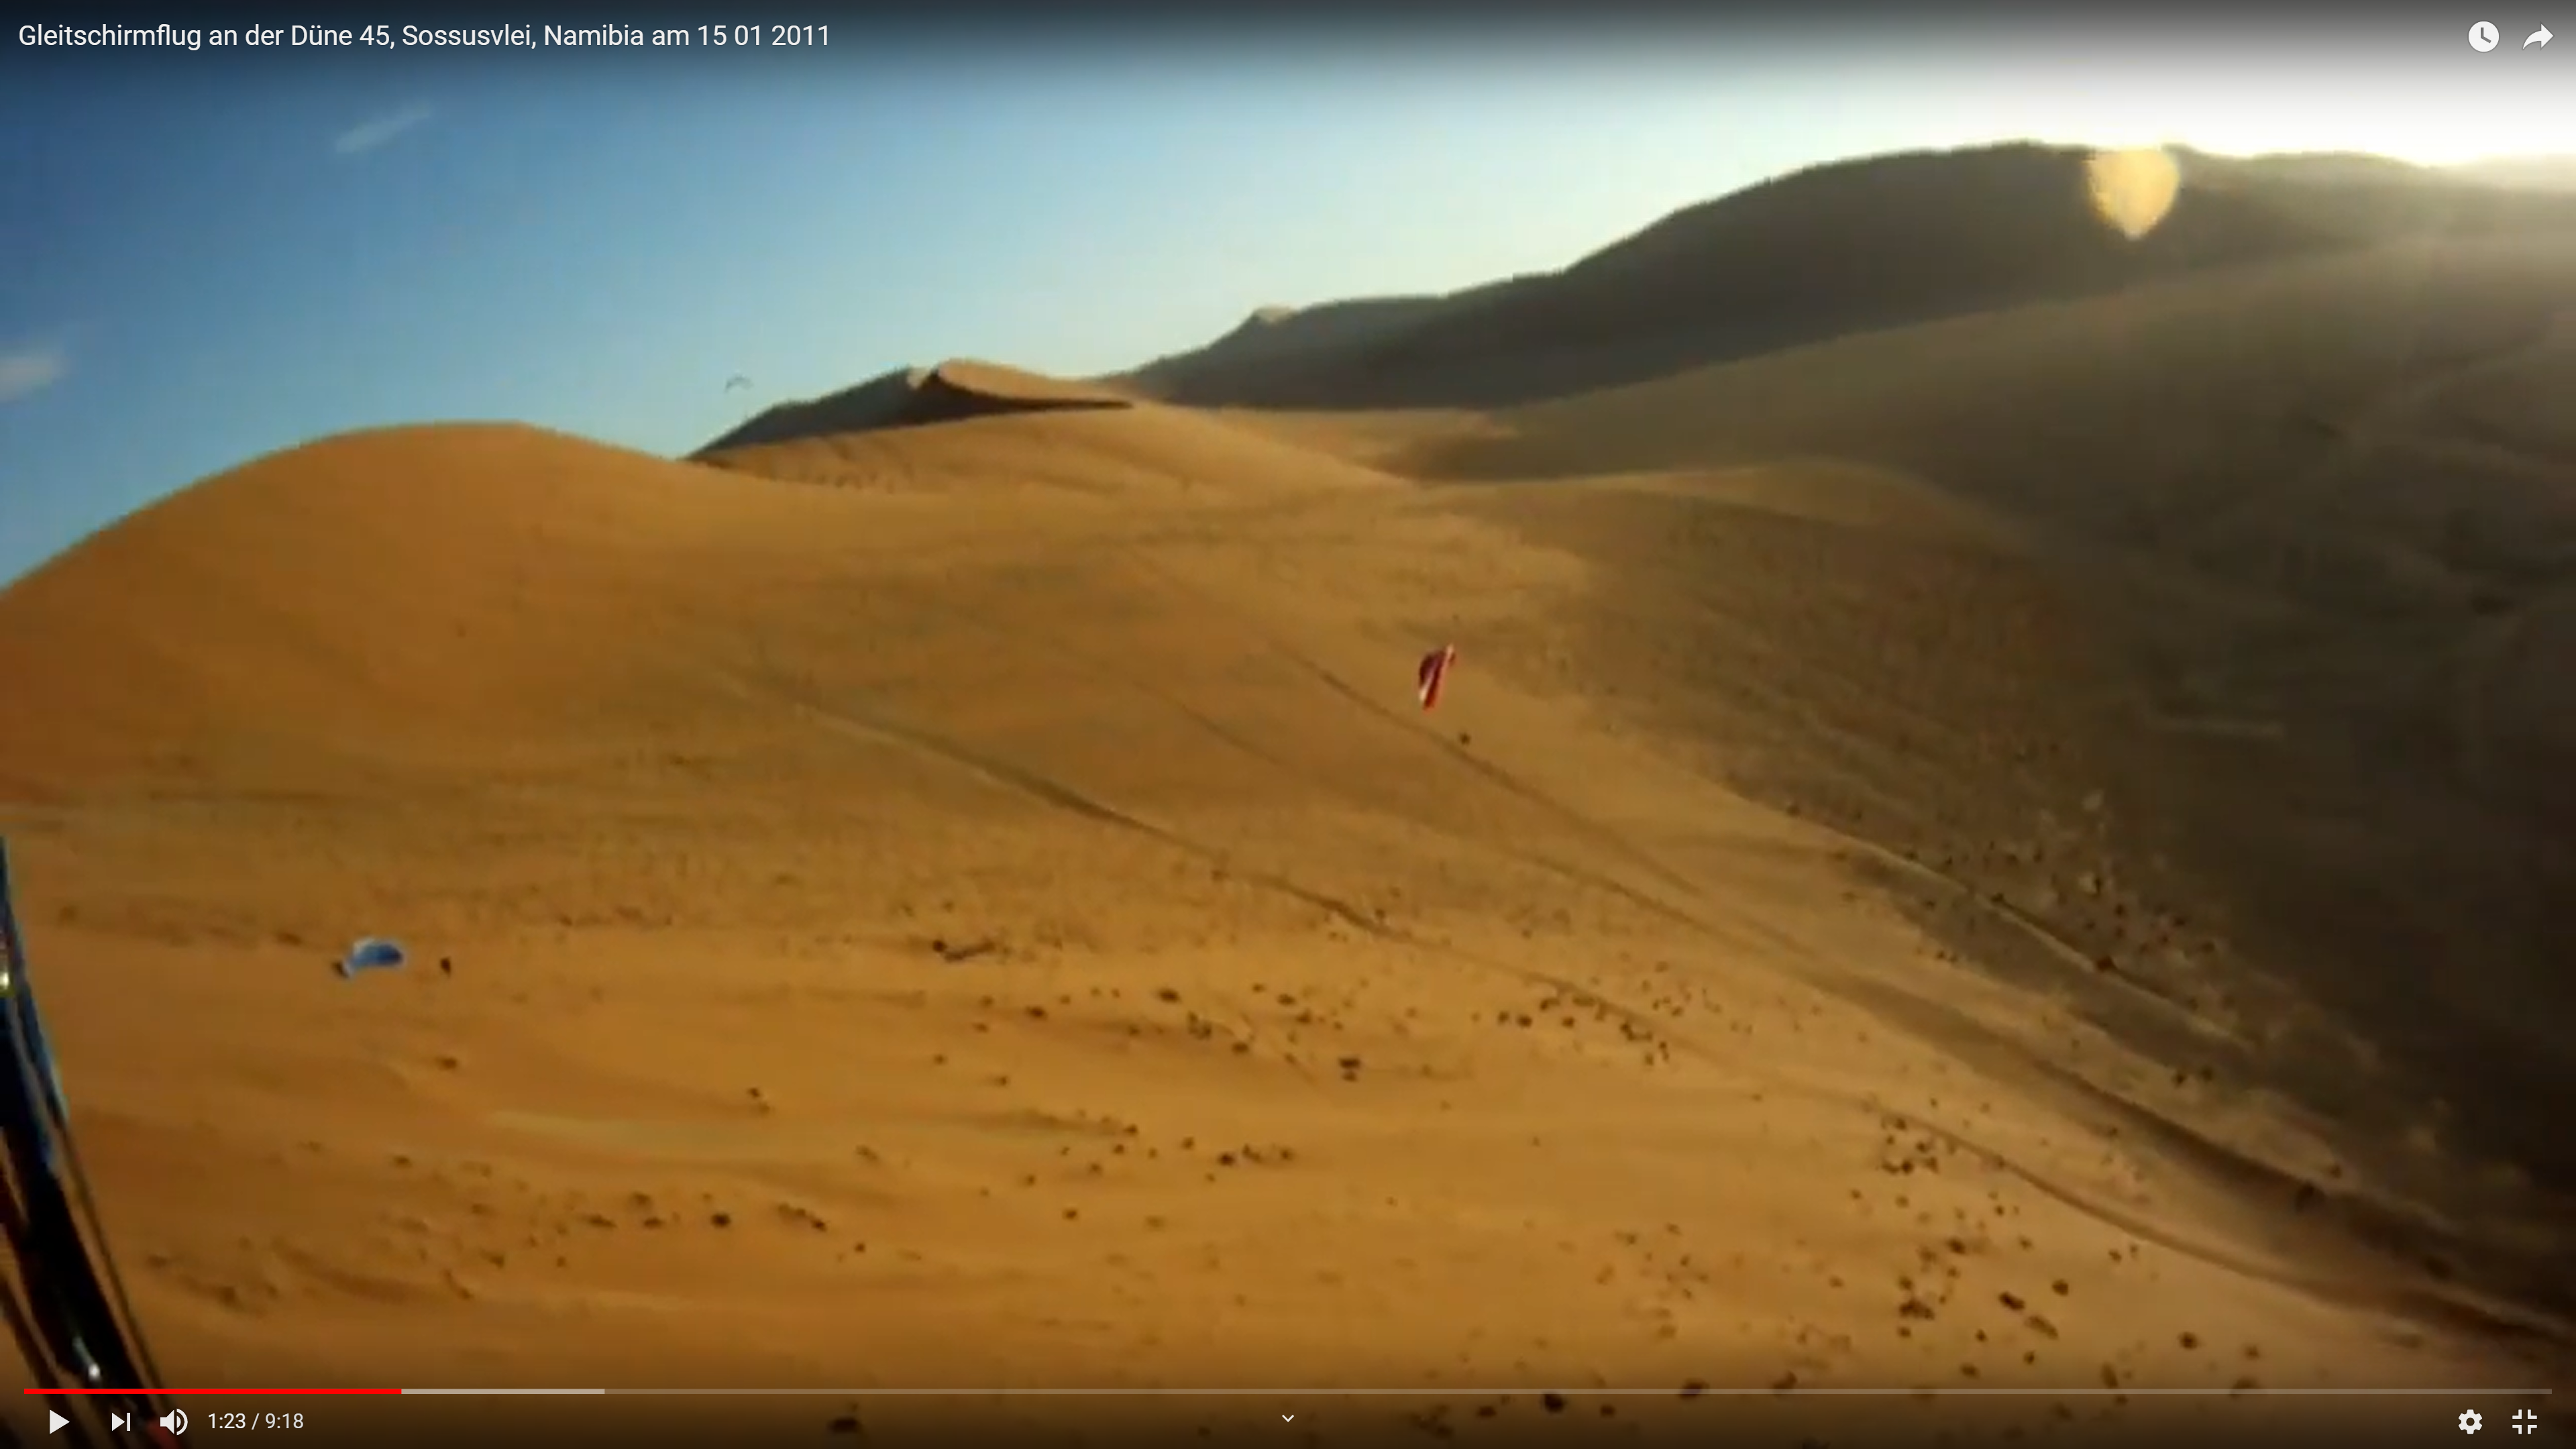 You are currently viewing Paragliding at the Dune 45, Sossusvlei, Namibia